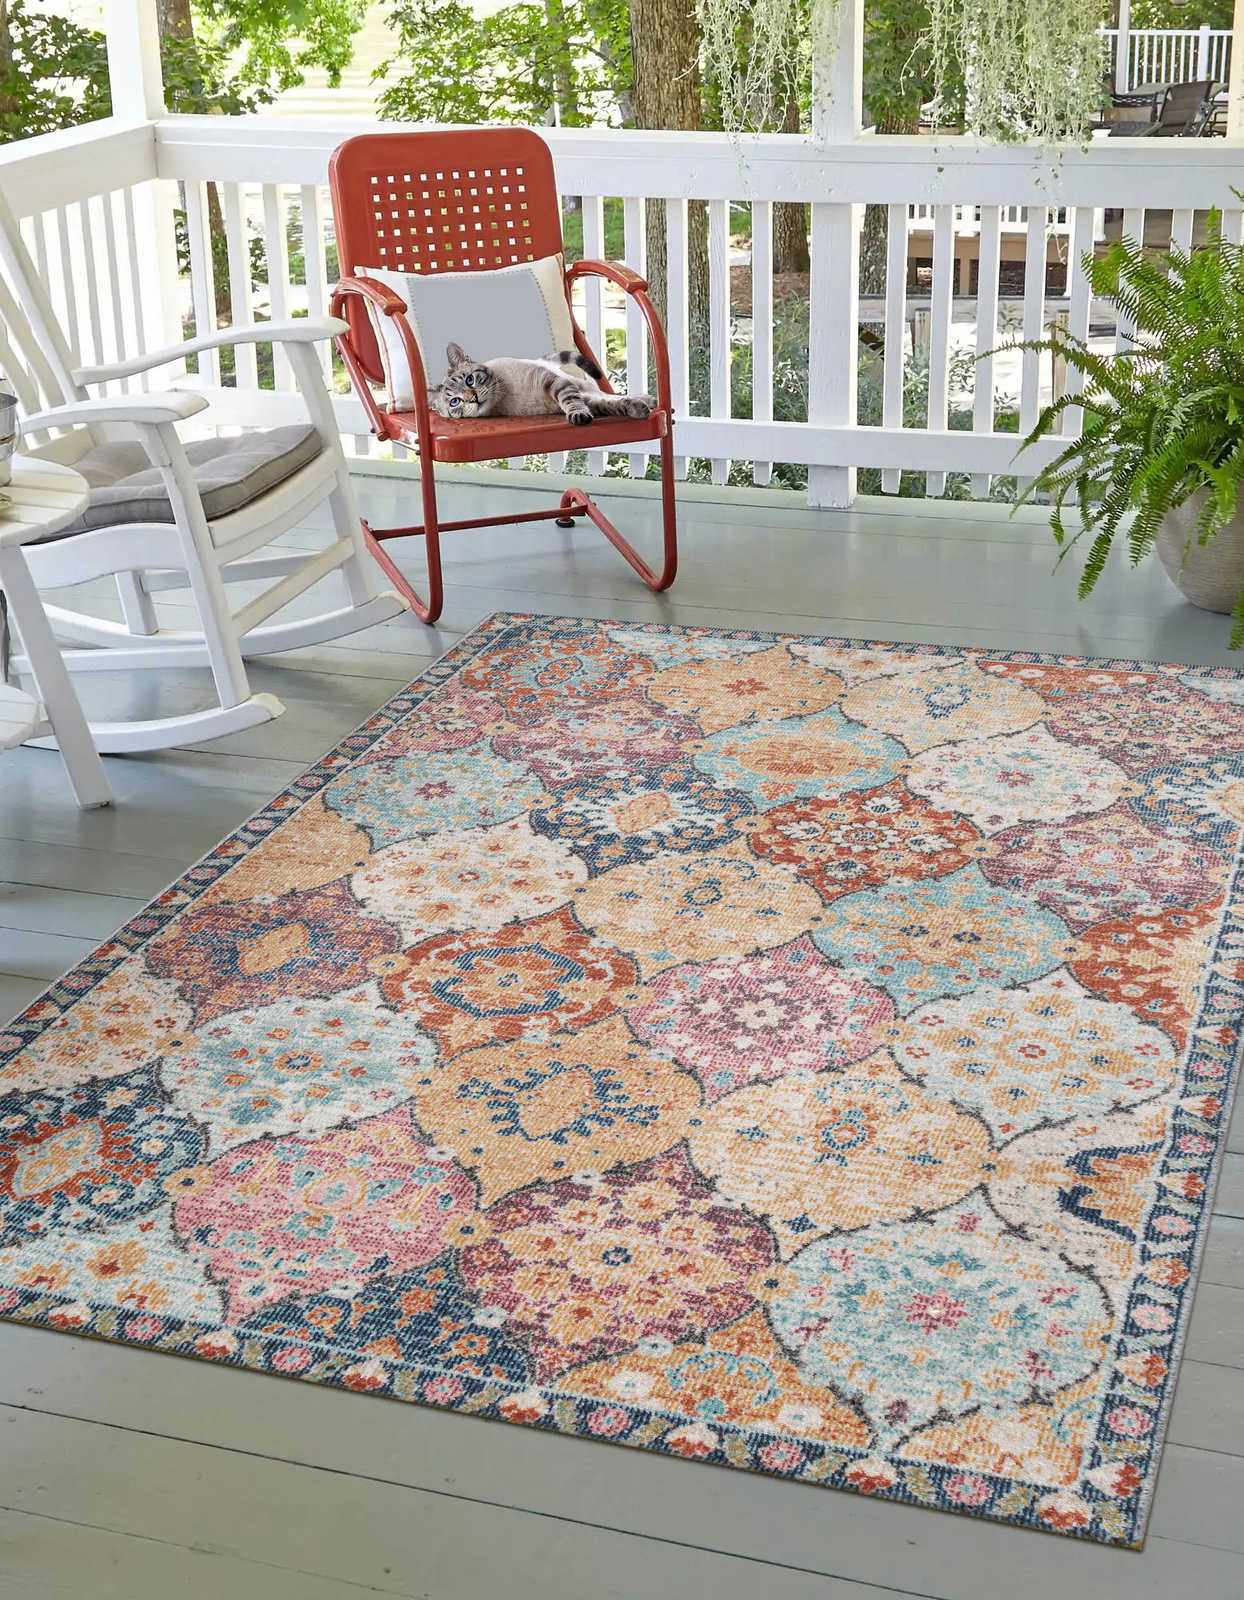 Colourful Flatweave Outdoor Rug - 150 x 80 cm
